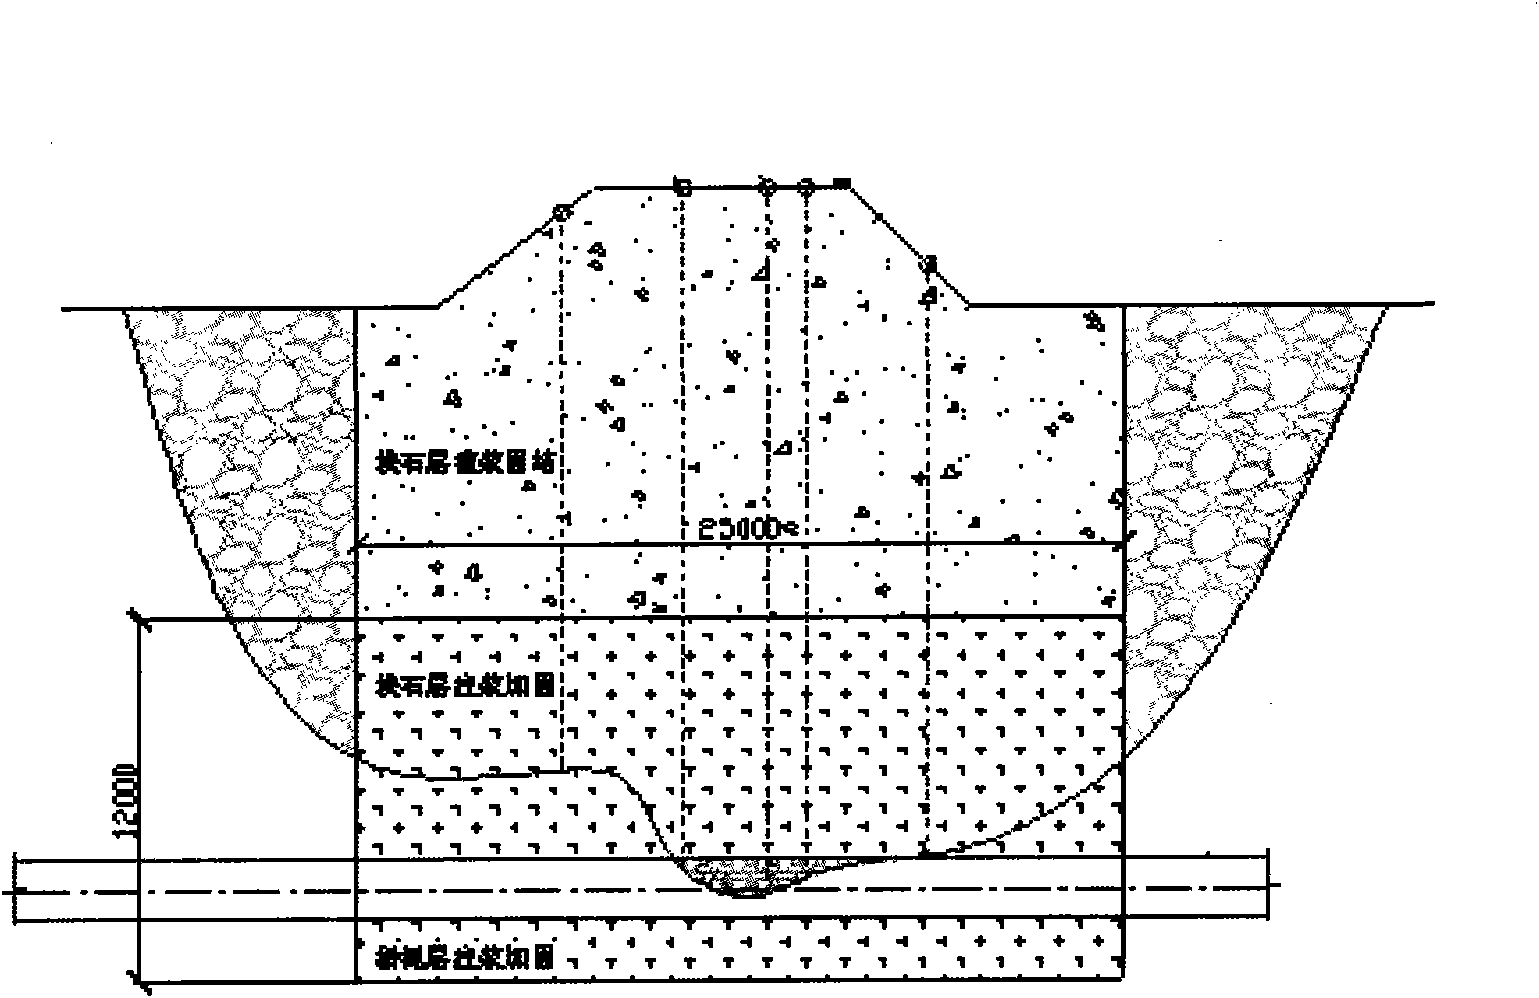 Seawall construction method with top pipes penetrating through block stone